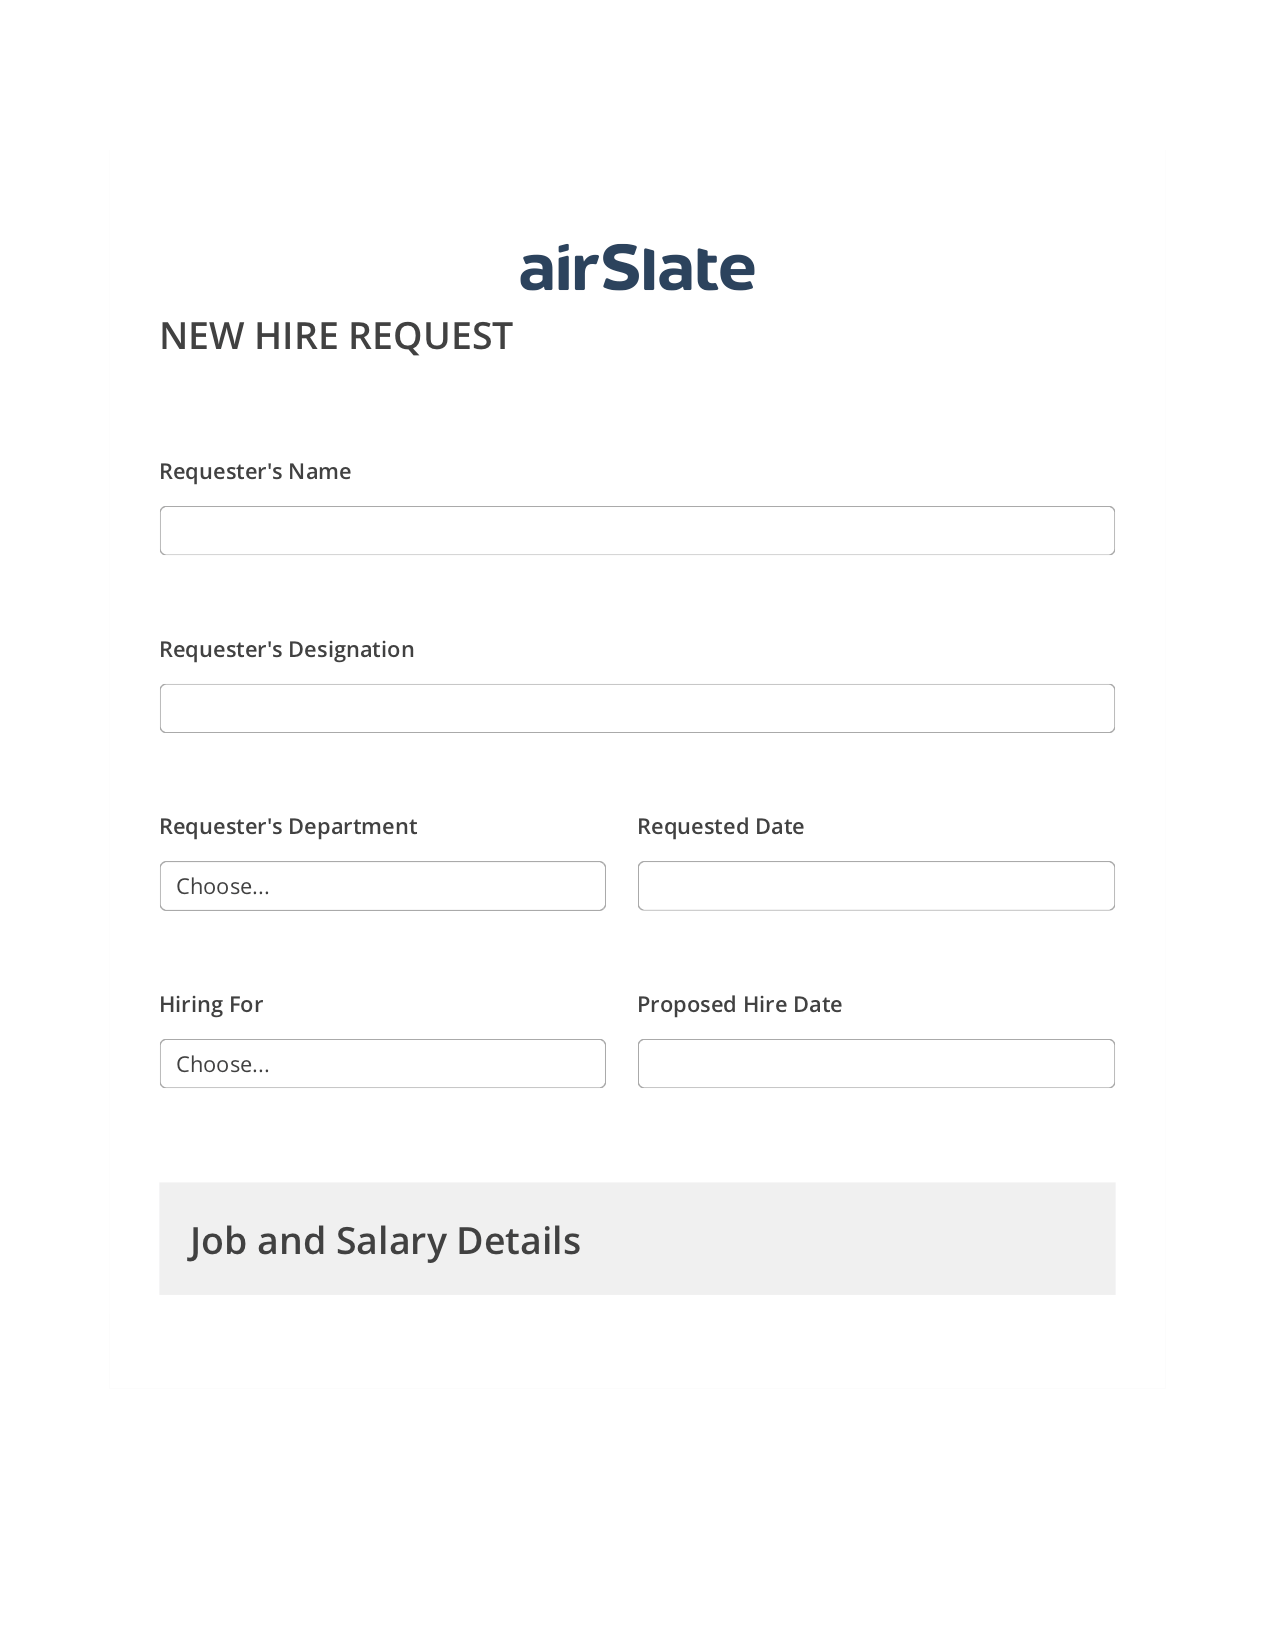 Multirole Hiring Request Workflow Pre-fill from Smartsheet Bot, Remove Slate Bot, Archive to OneDrive Bot